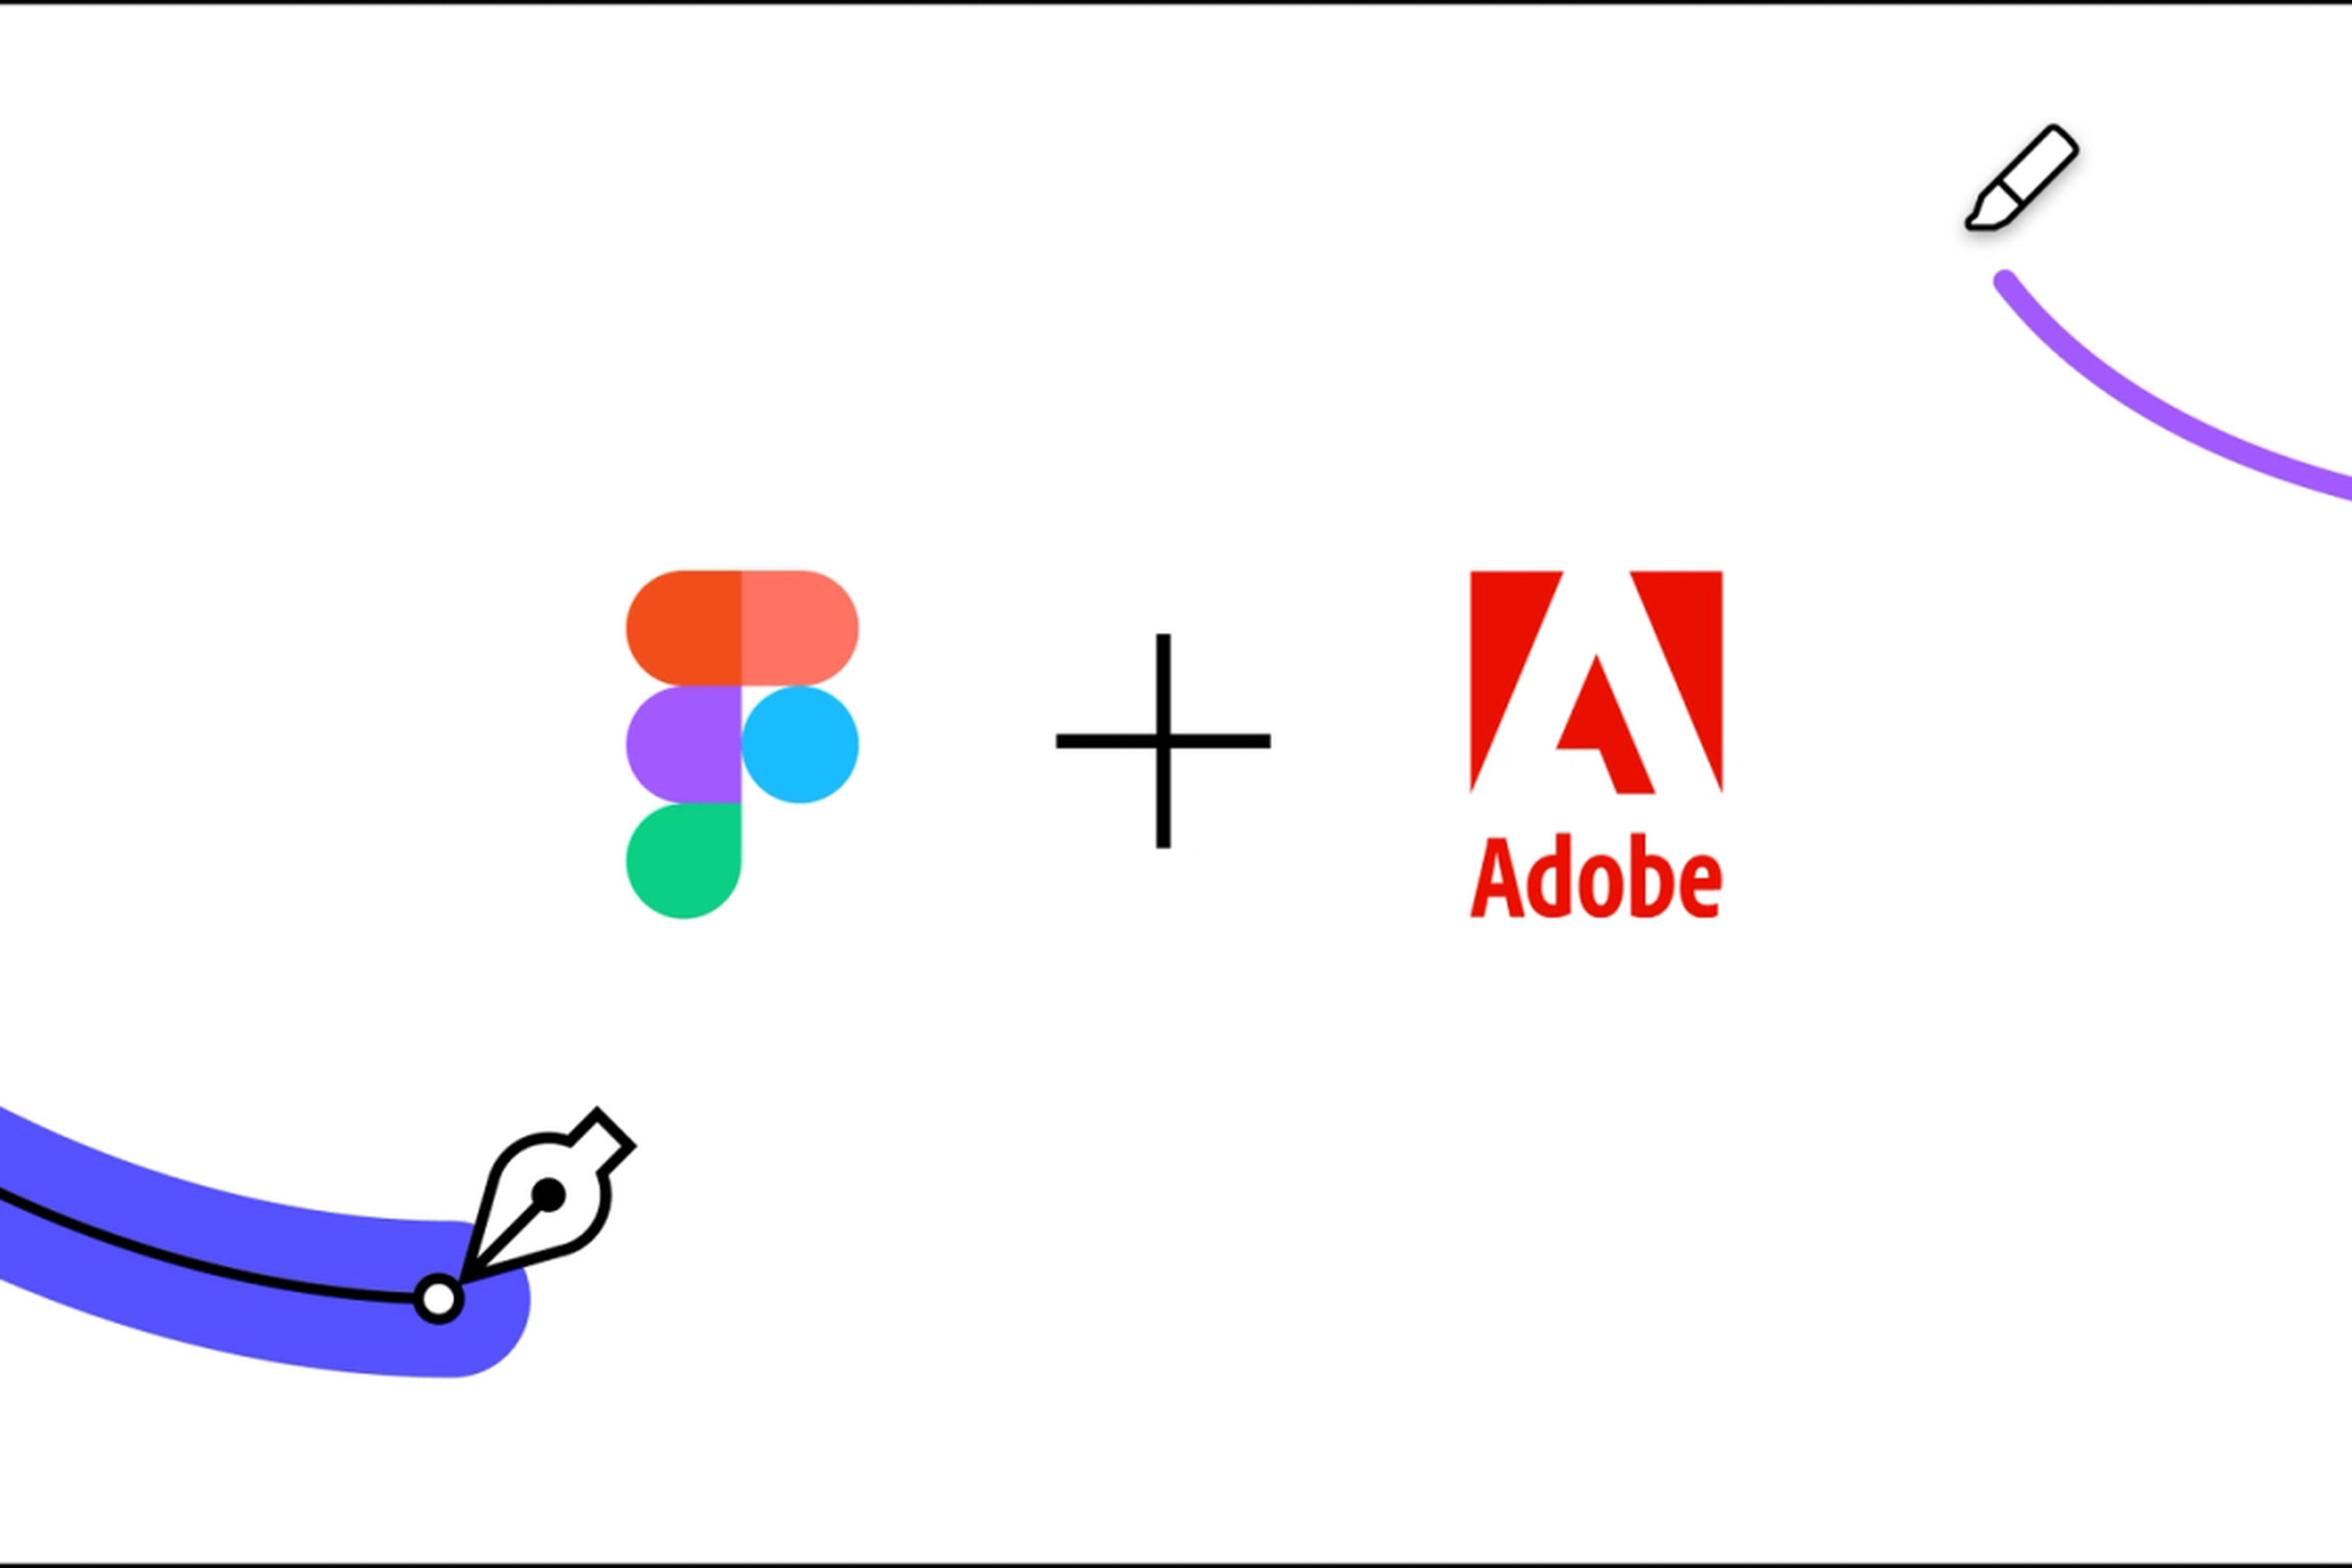 An illustration of Adobe and Figma logos.